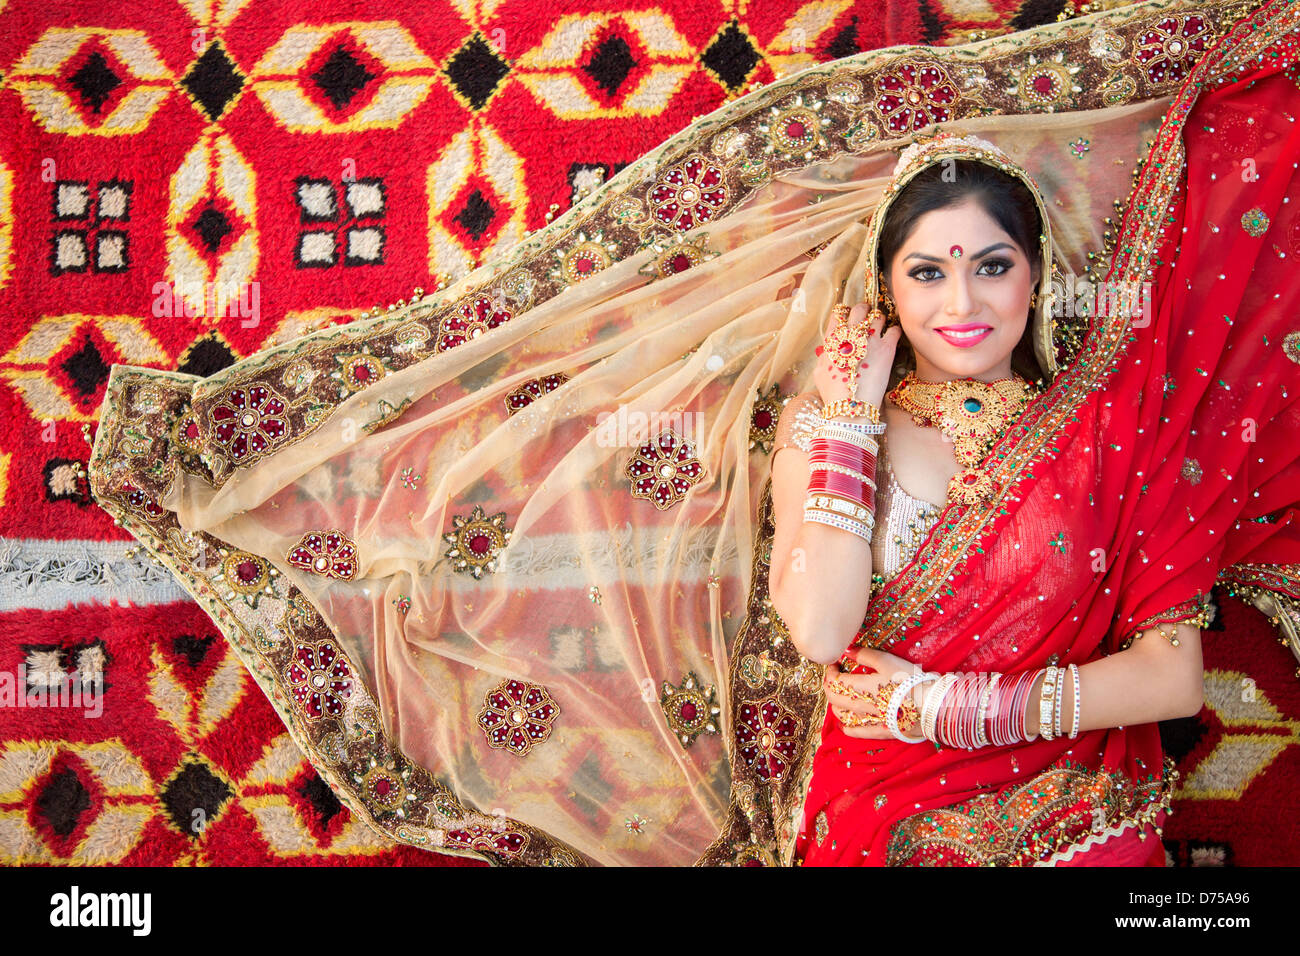 dulha dulhan poses • ShareChat Photos and Videos